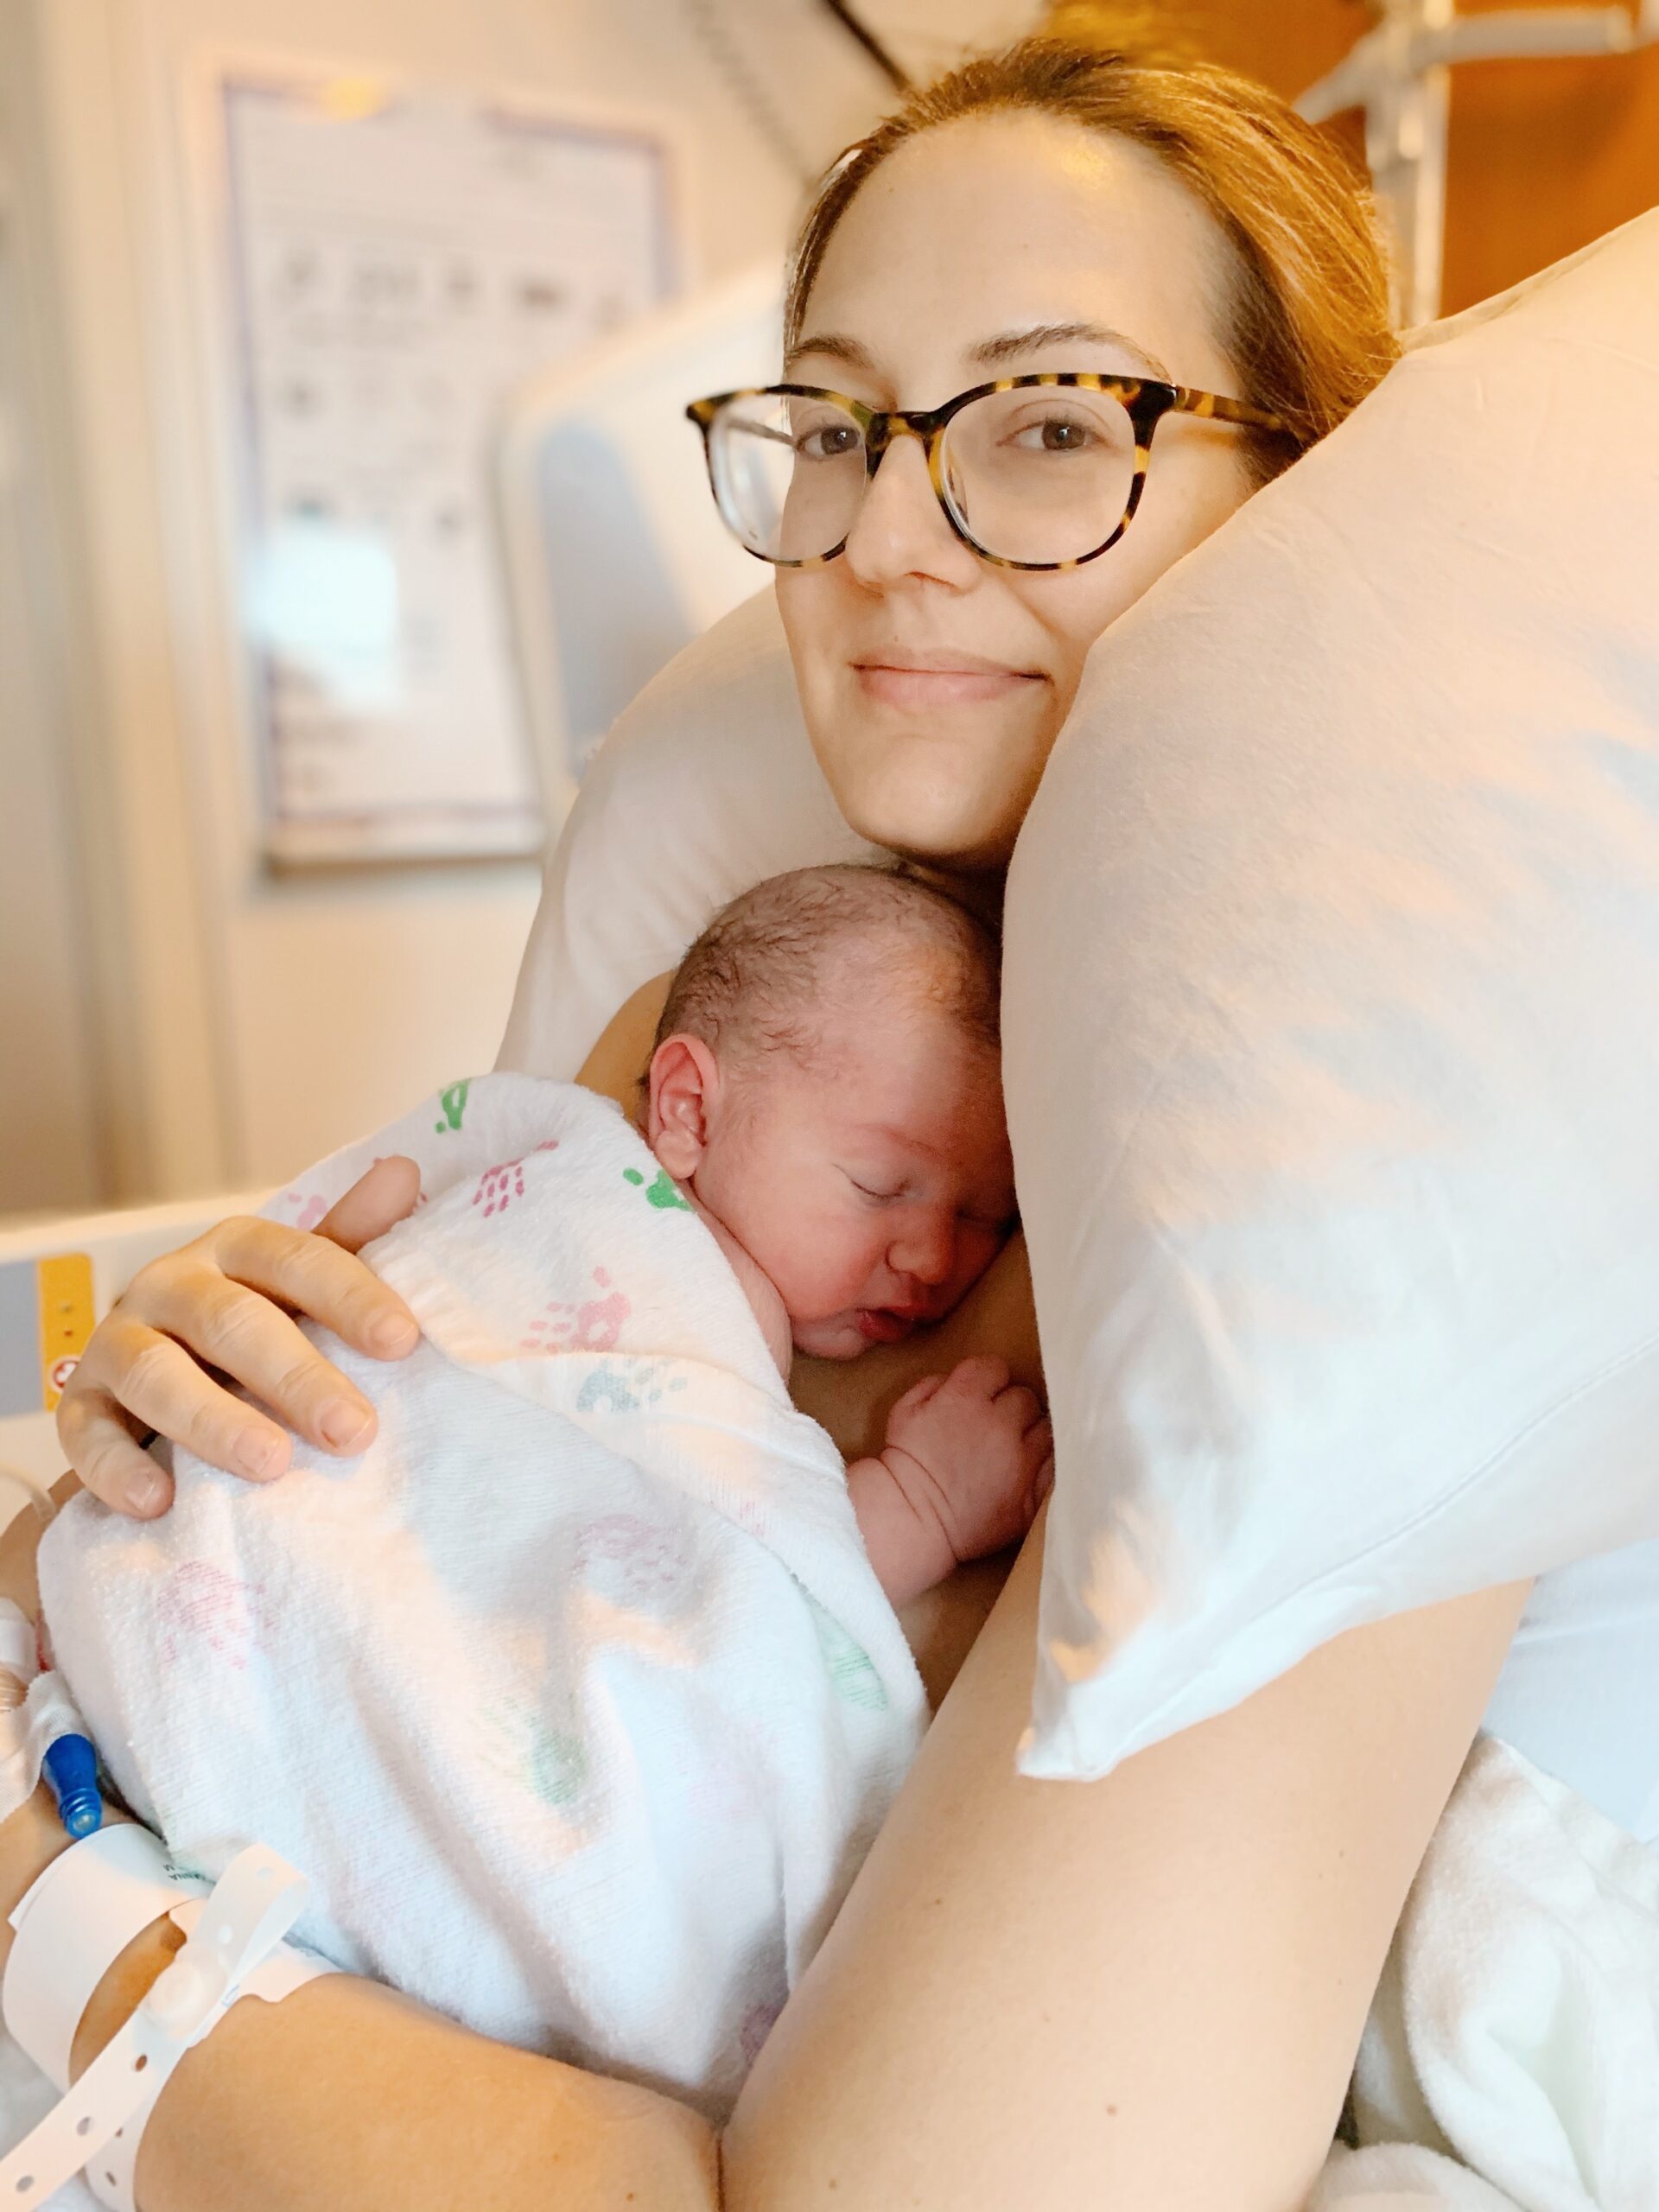 c-section recovery tips postpartum expectations - See (Anna) Jane.